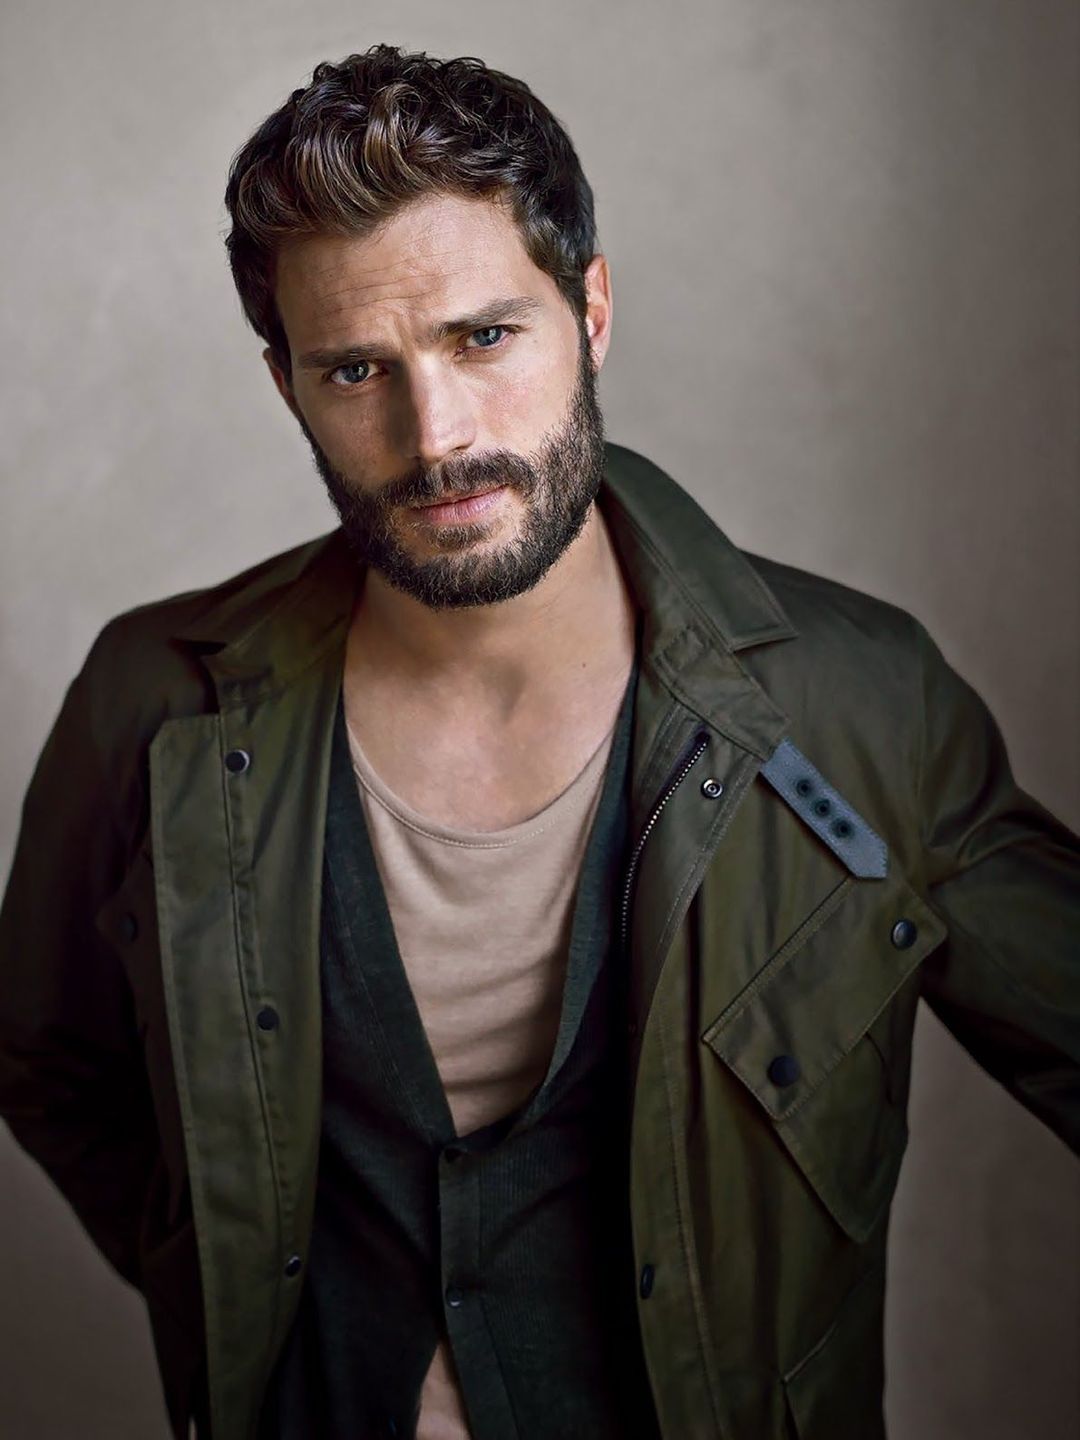 Jamie Dornan does he have a wife